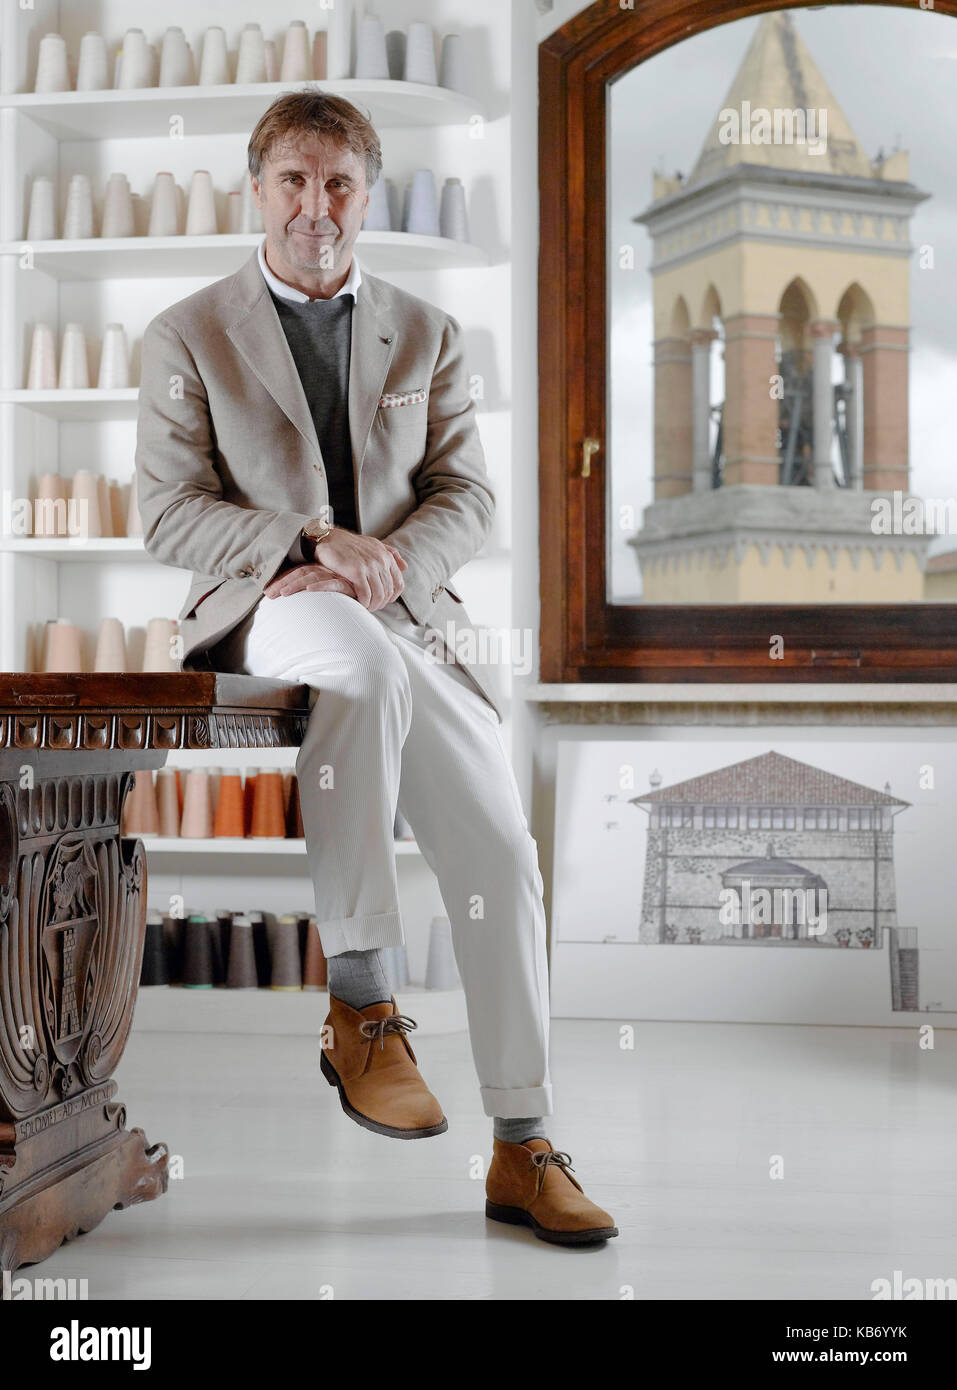 Brunello Cucinelli fashion designer and producer of cashmere clothing portraited in his office